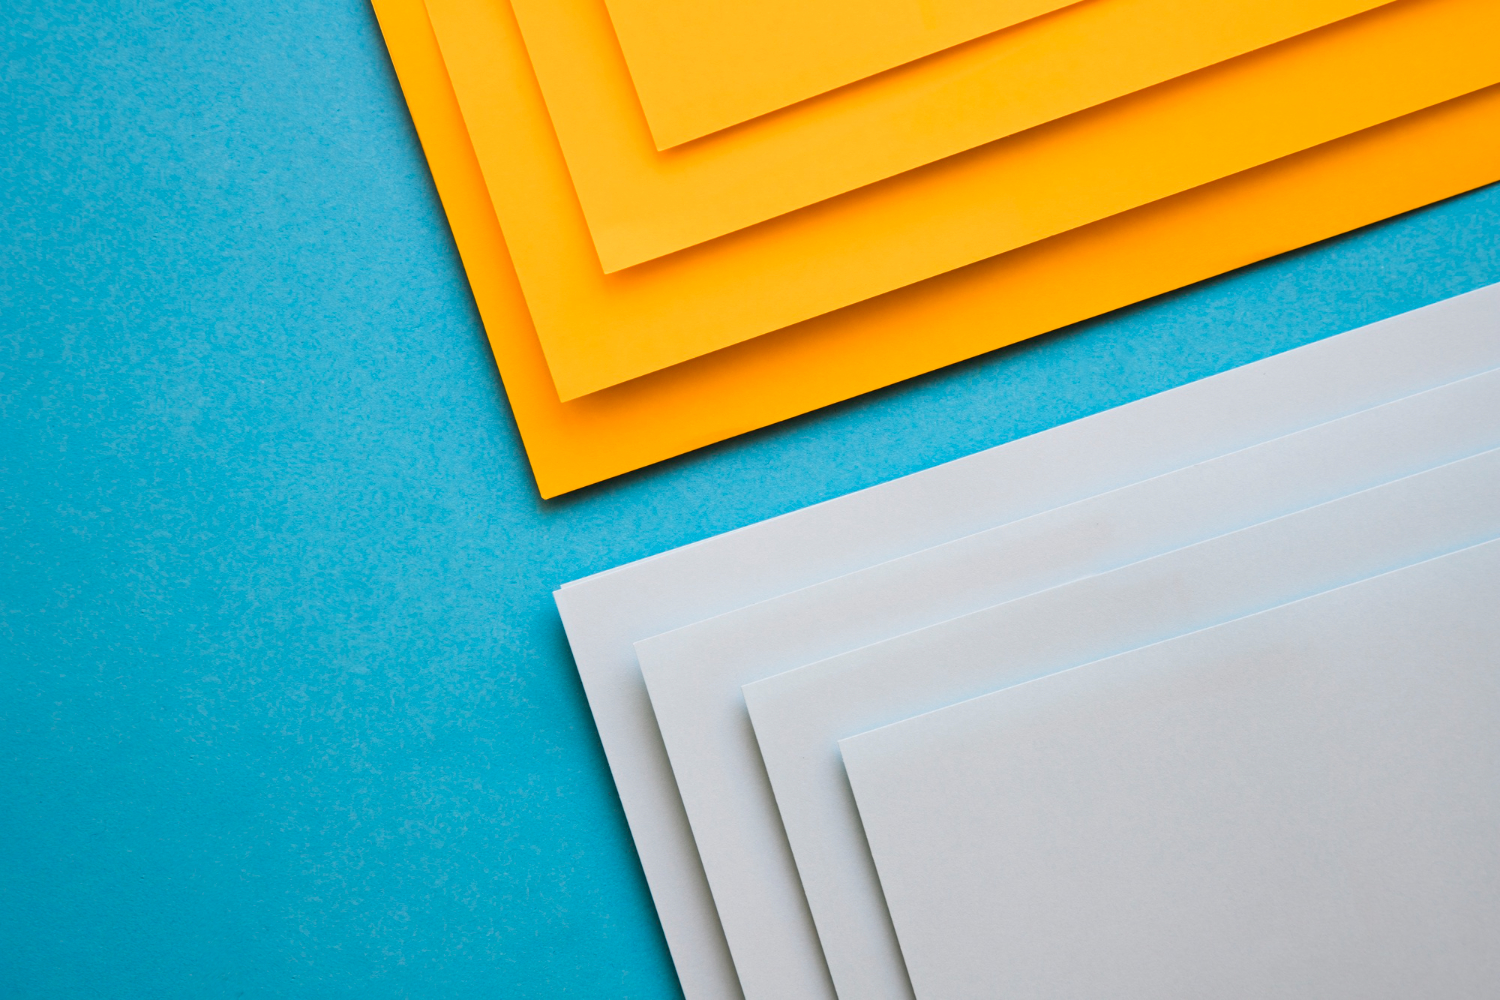 elevated-view-grey-yellow-cardboard-papers-blue-surface